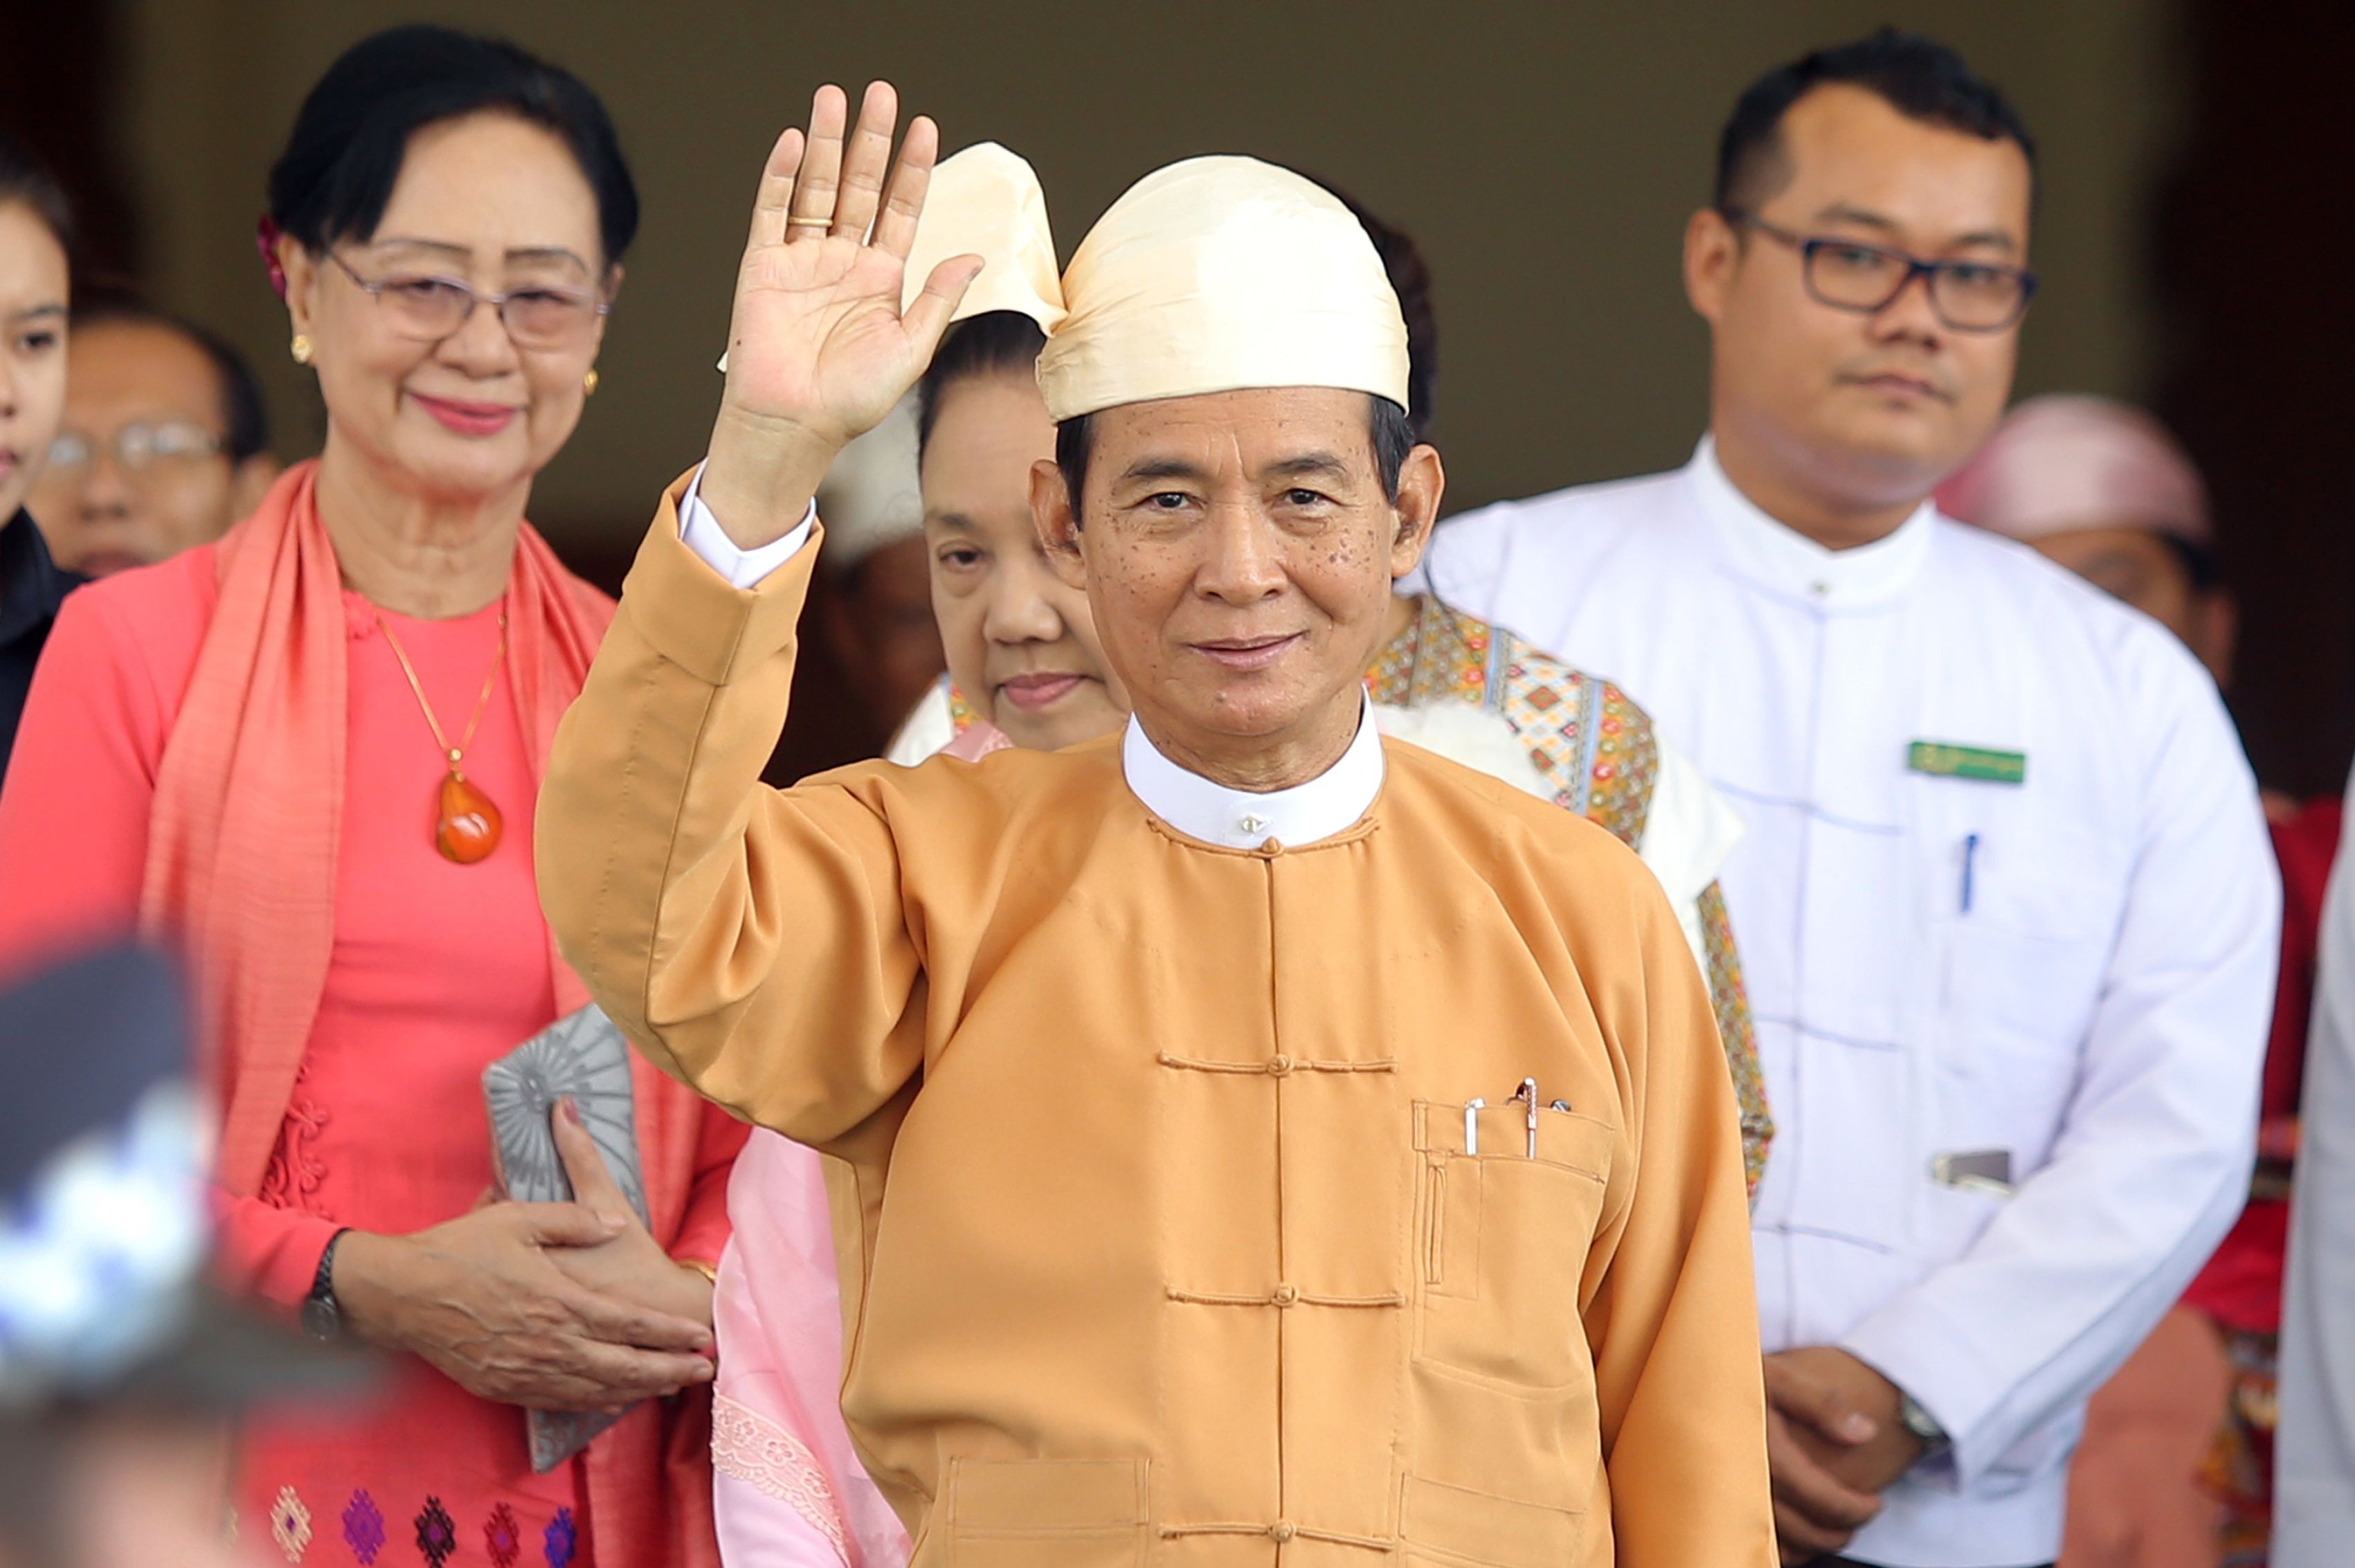 Win Myint is known to be assertive and ambitious, but to rule with authority he will have to work against both Suu Kyi’s well-known micromanagement of her party members as well as the powerful military